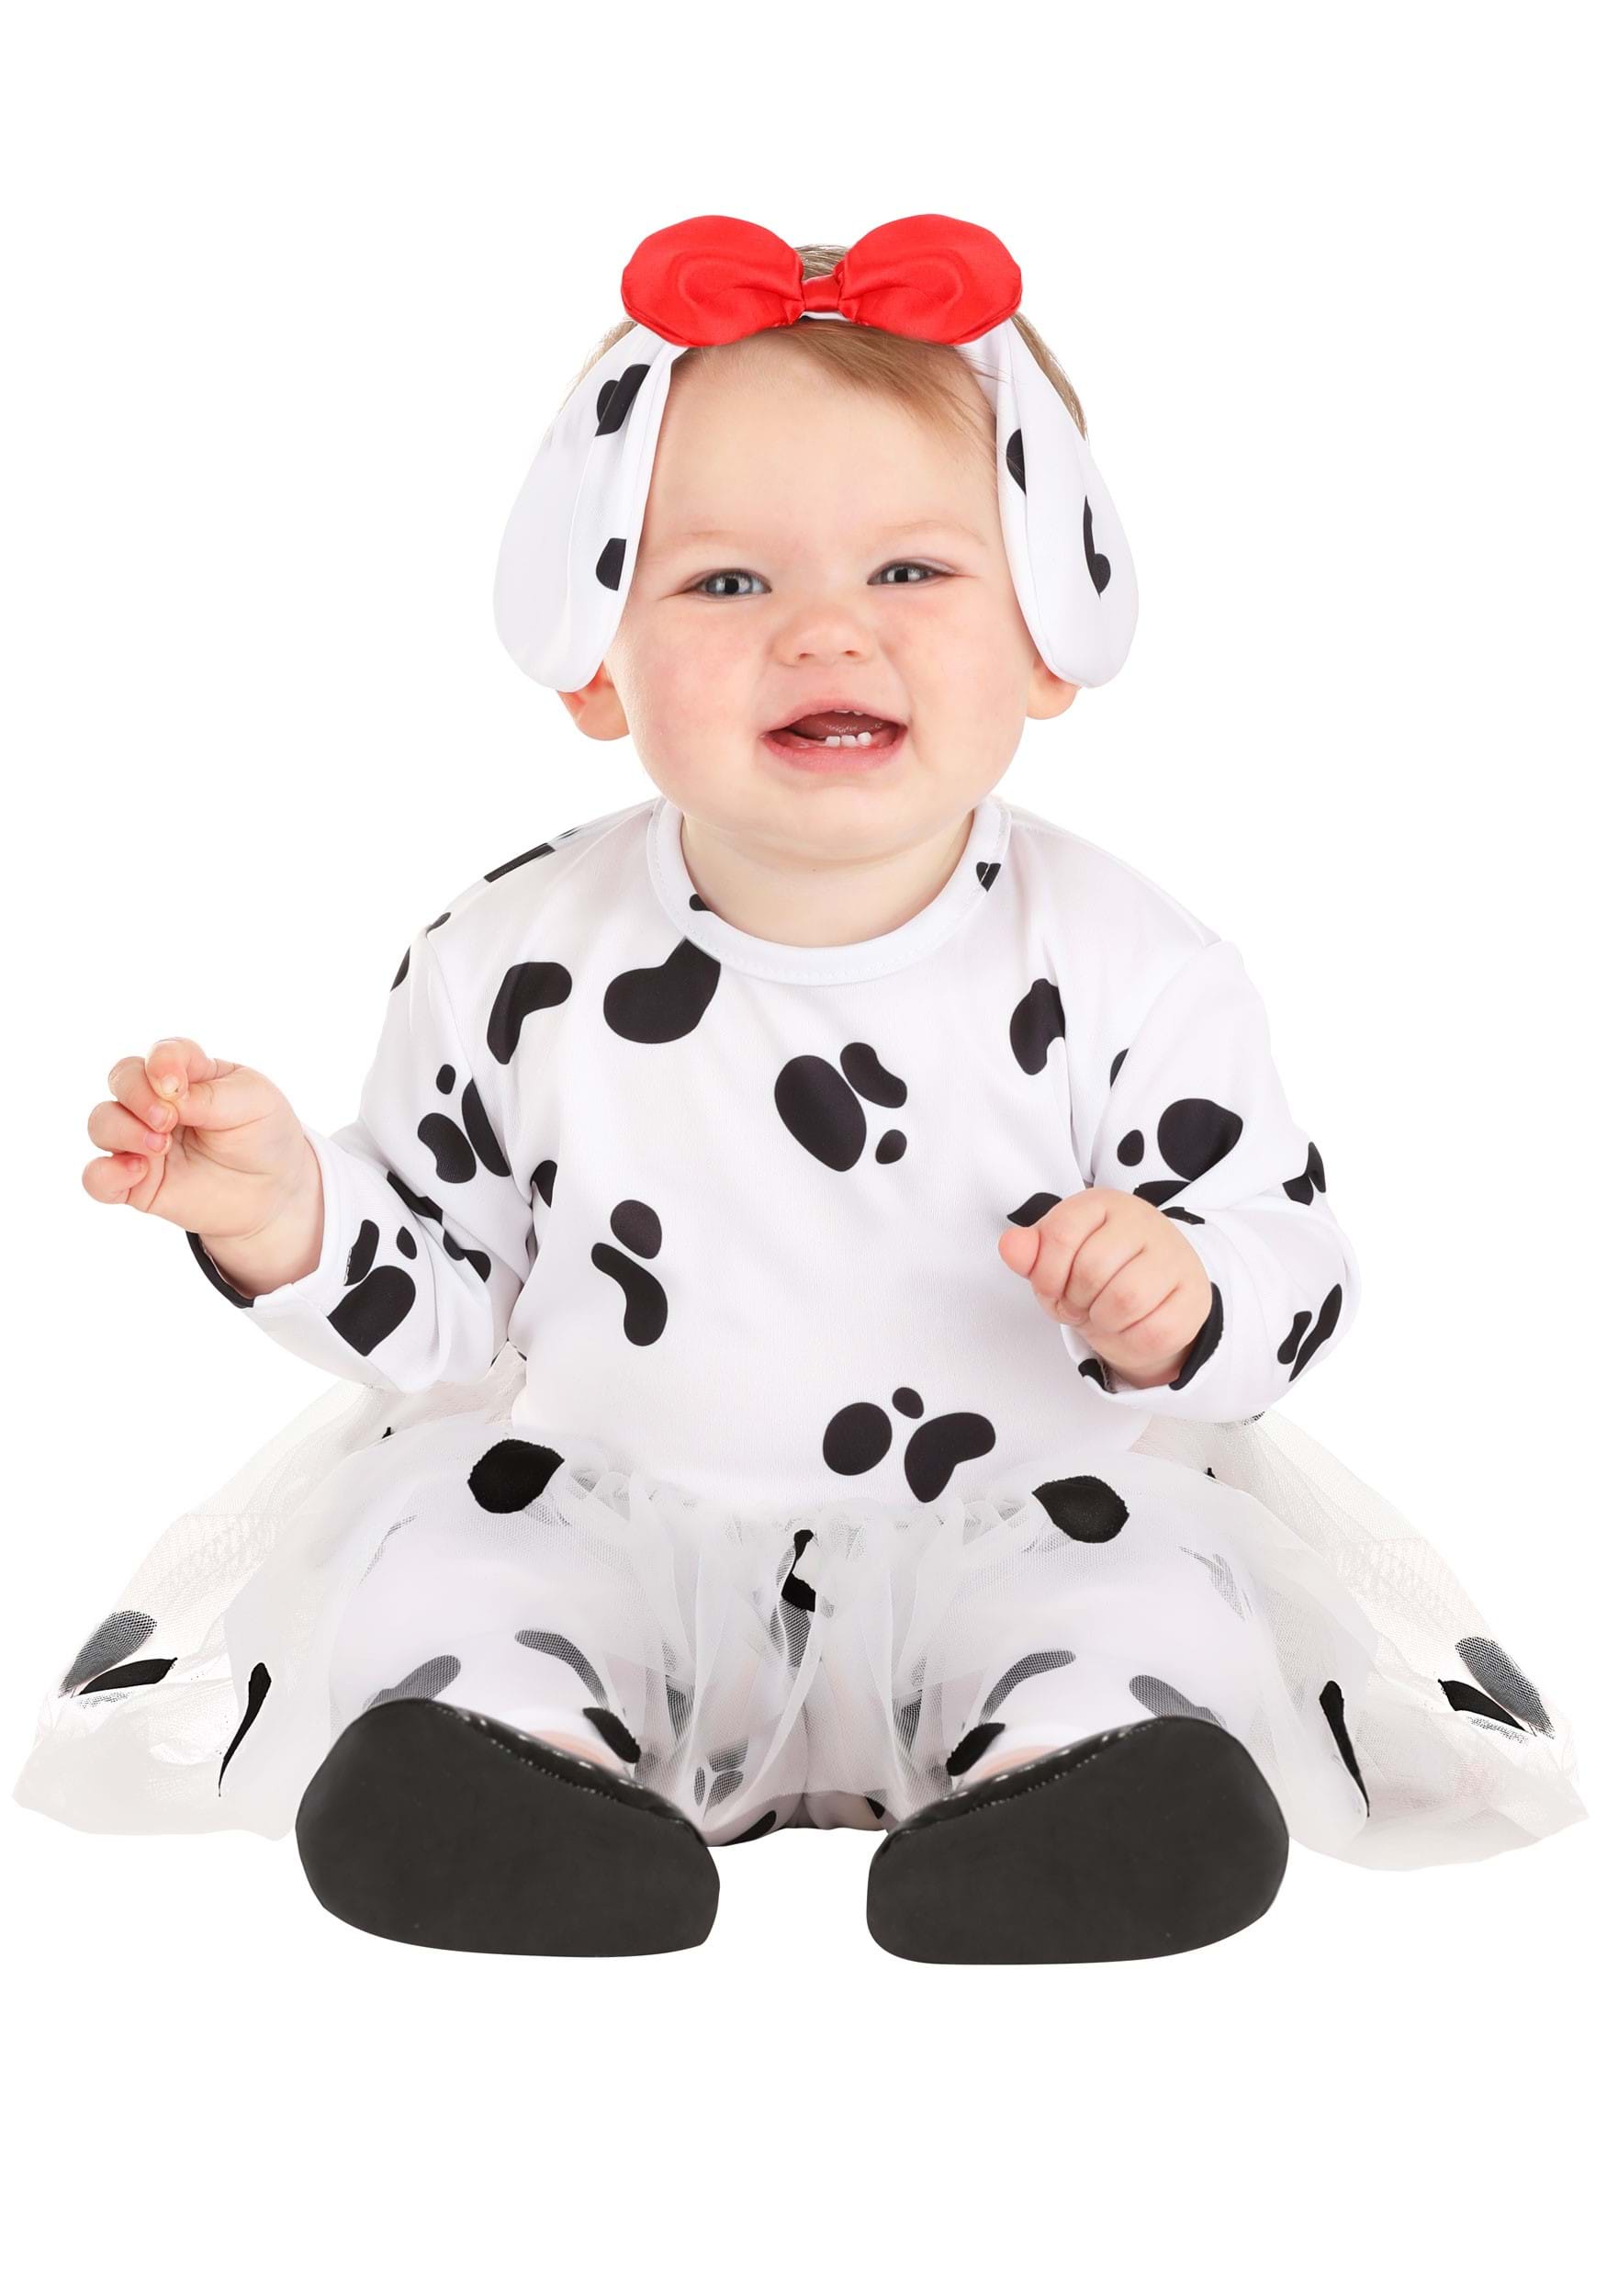 Adorable Dalmatian Infant Costume | Dog Costumes for Babies